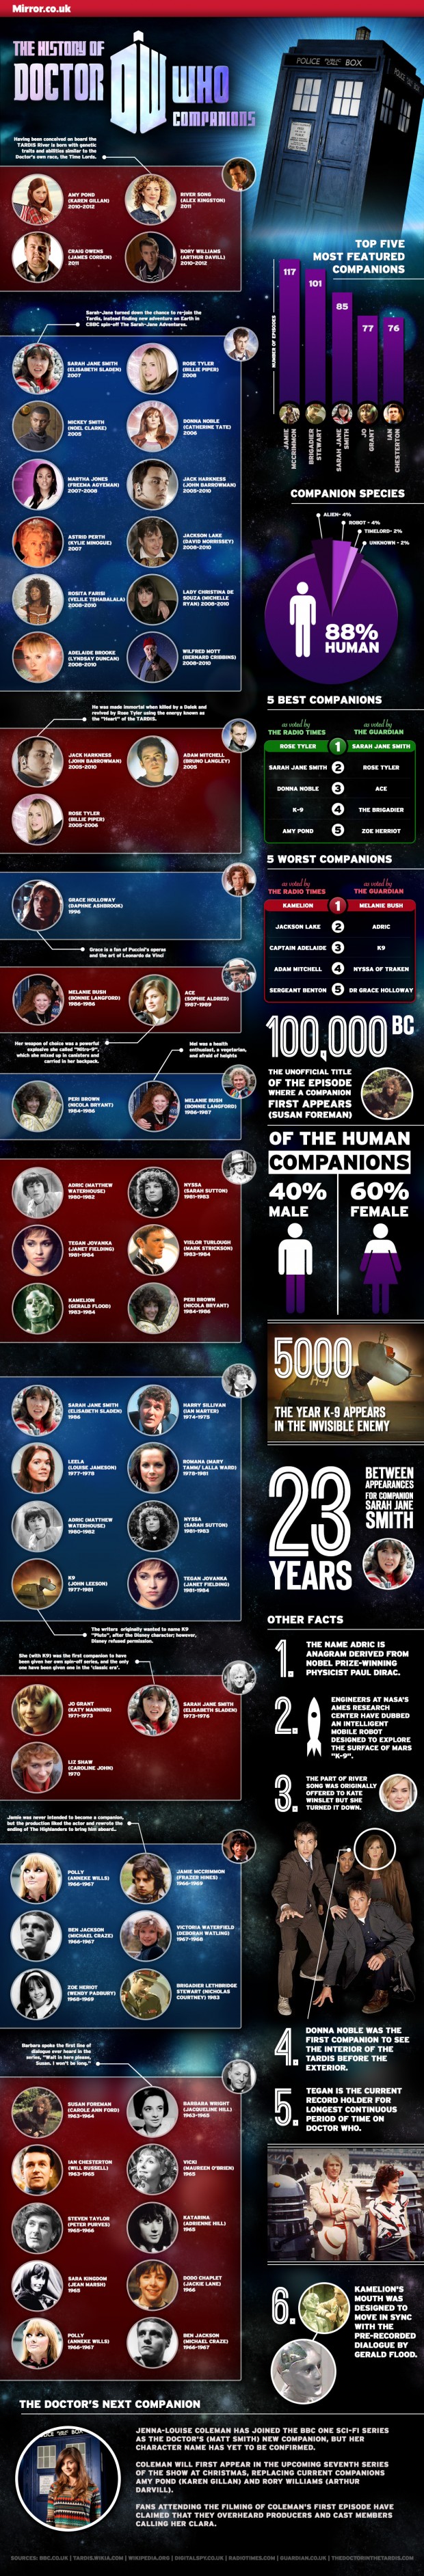 Ultimate Doctor Who Companion Infographic